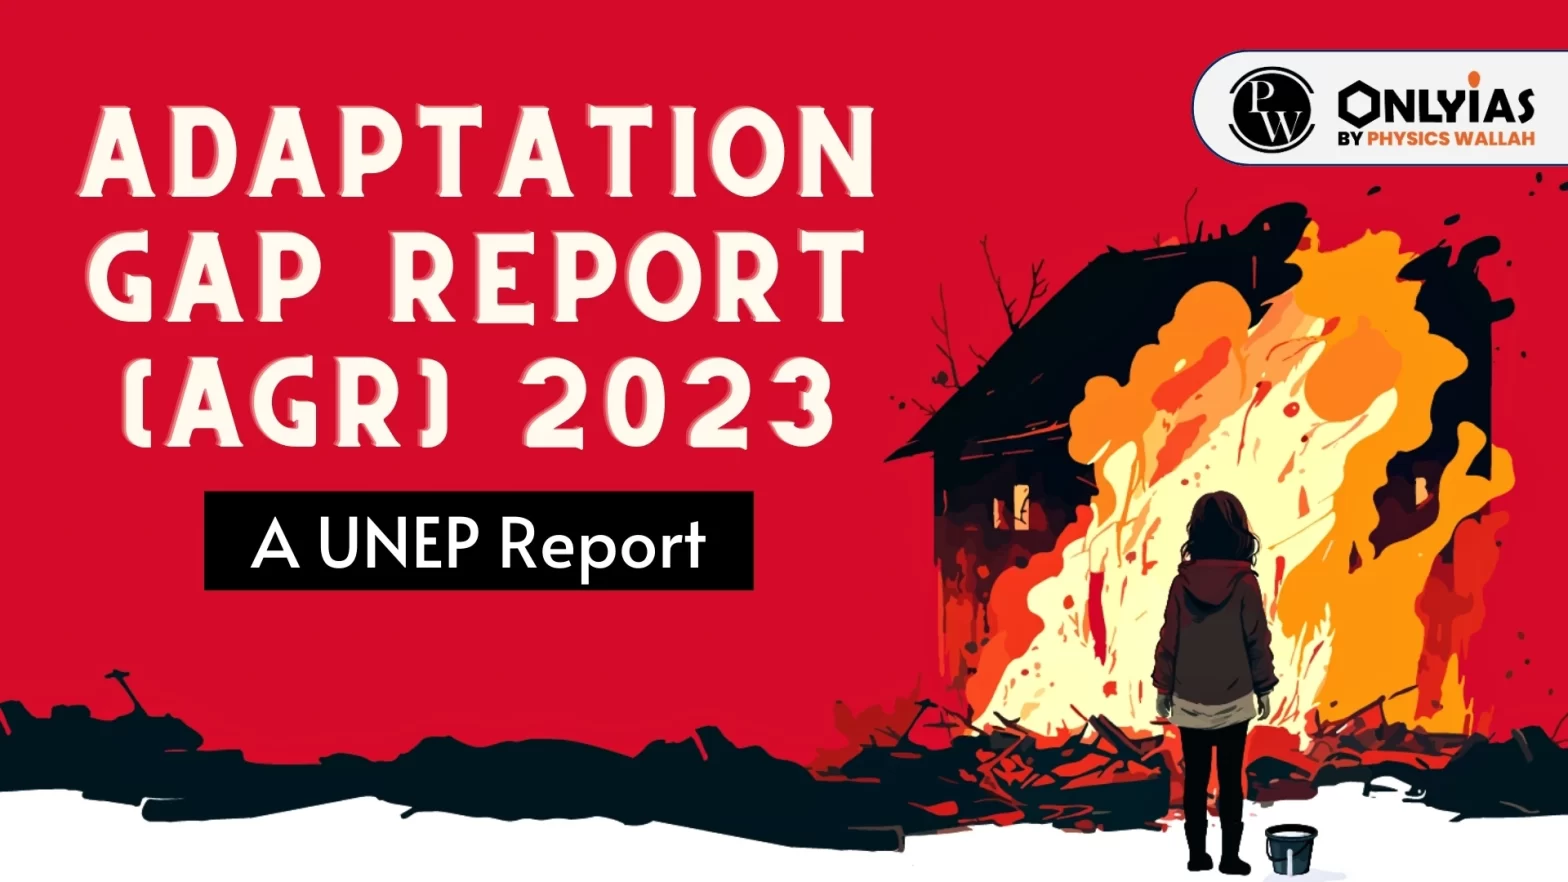 Adaptation Gap Report (AGR) 2023 – A UNEP Report